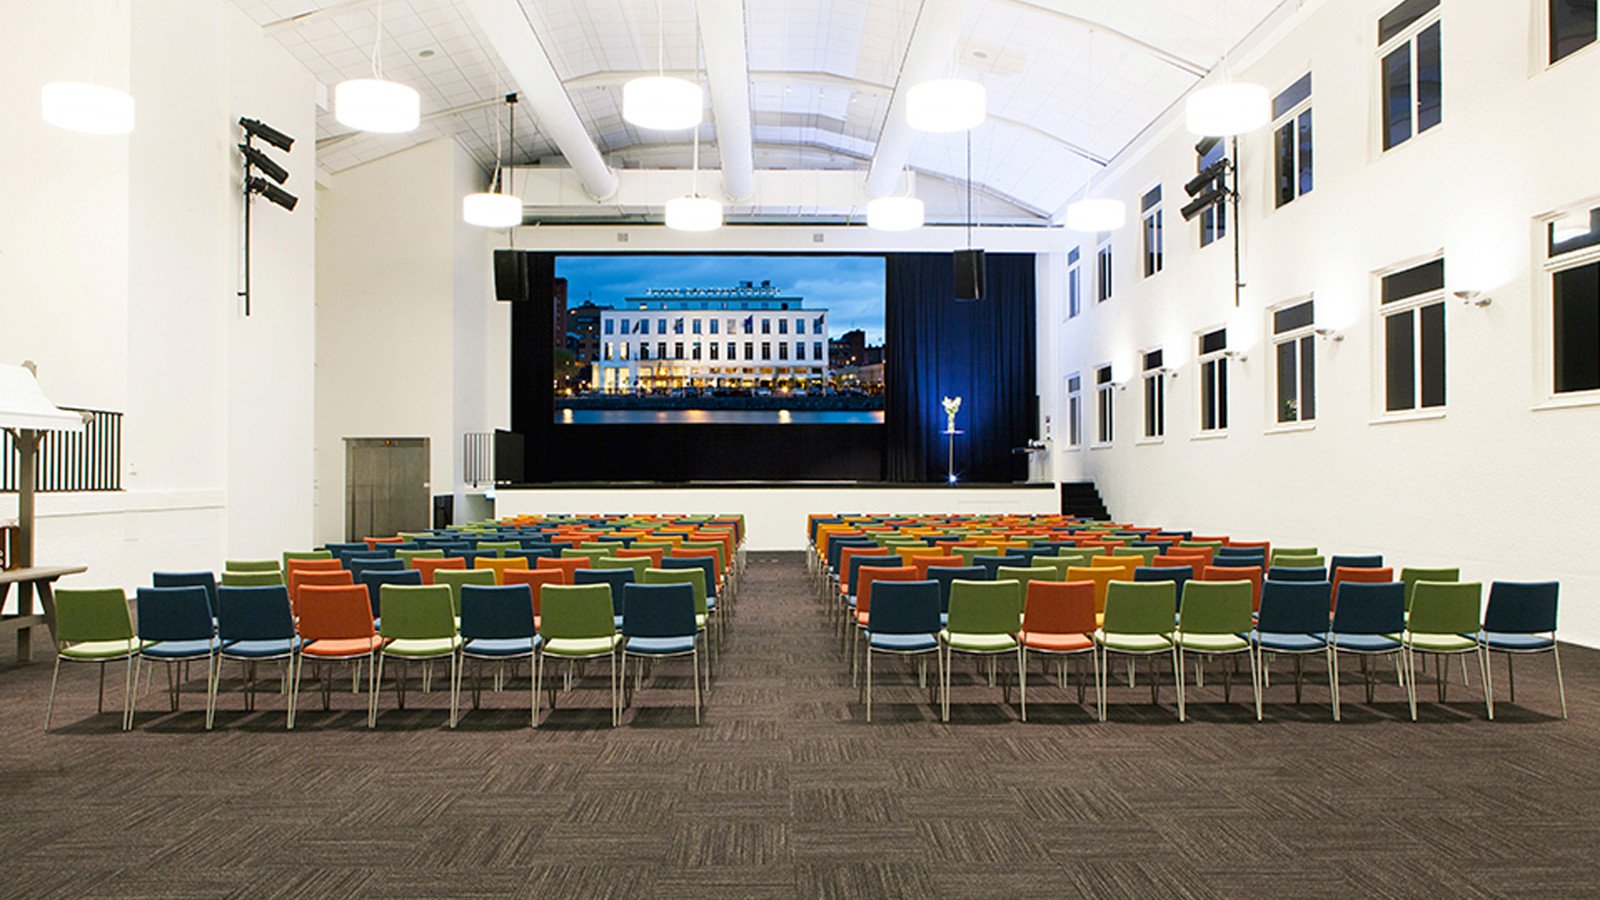 Large room with screen and many colourful chairs